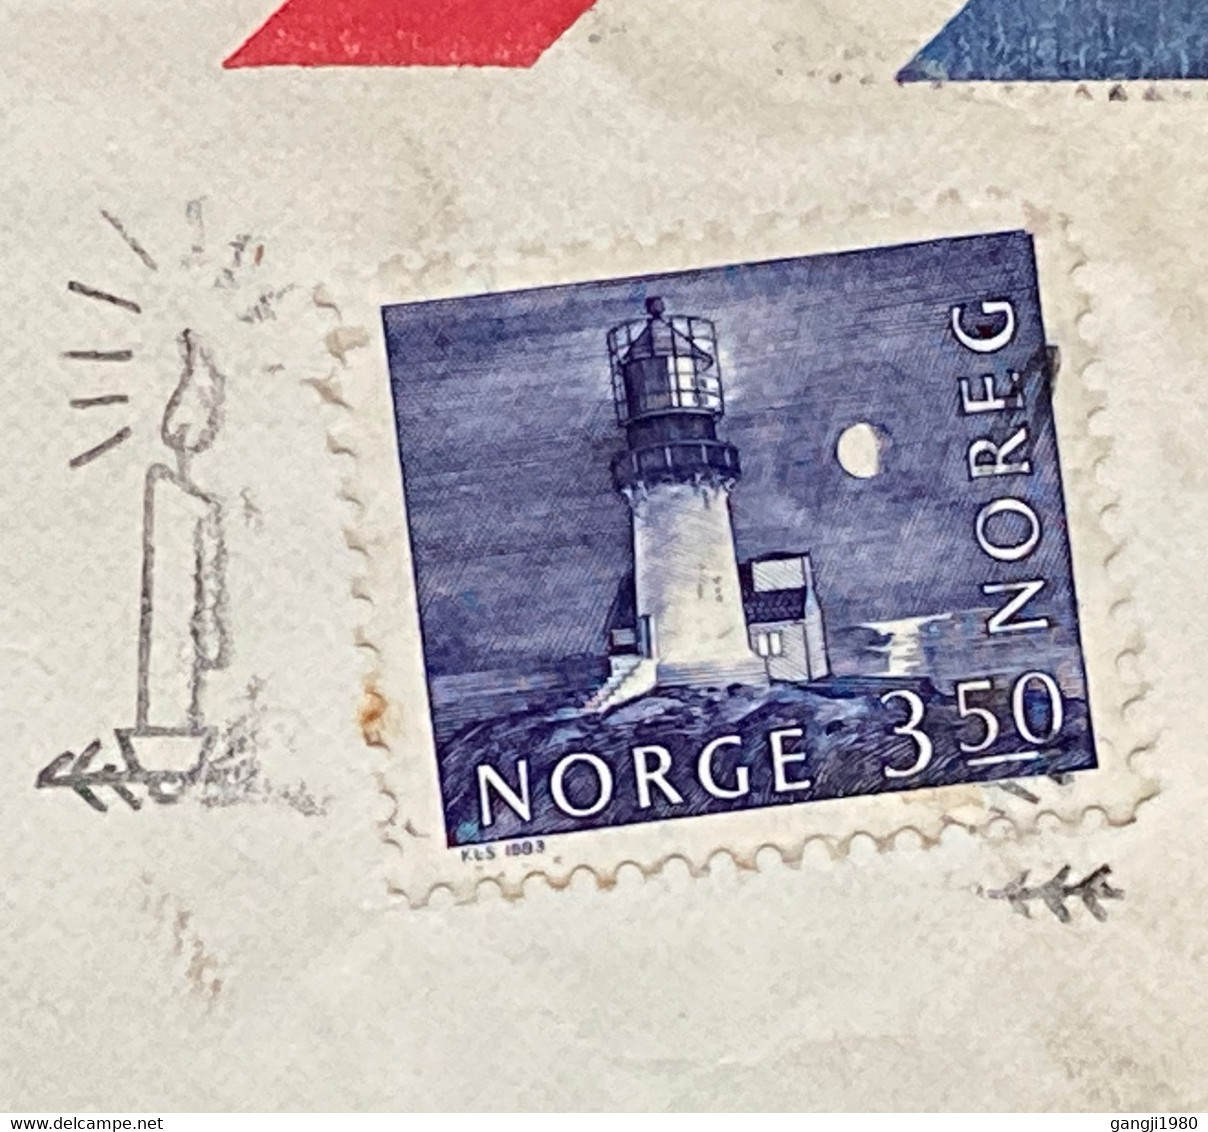 NORWAY,1984, AIR MAIL COVER TO INDIA, BERGEN CITY, CANDLE PICTURE, ROLLAR WAVY CANCELLATION, LIGHT HOUSE STAMP. - Storia Postale